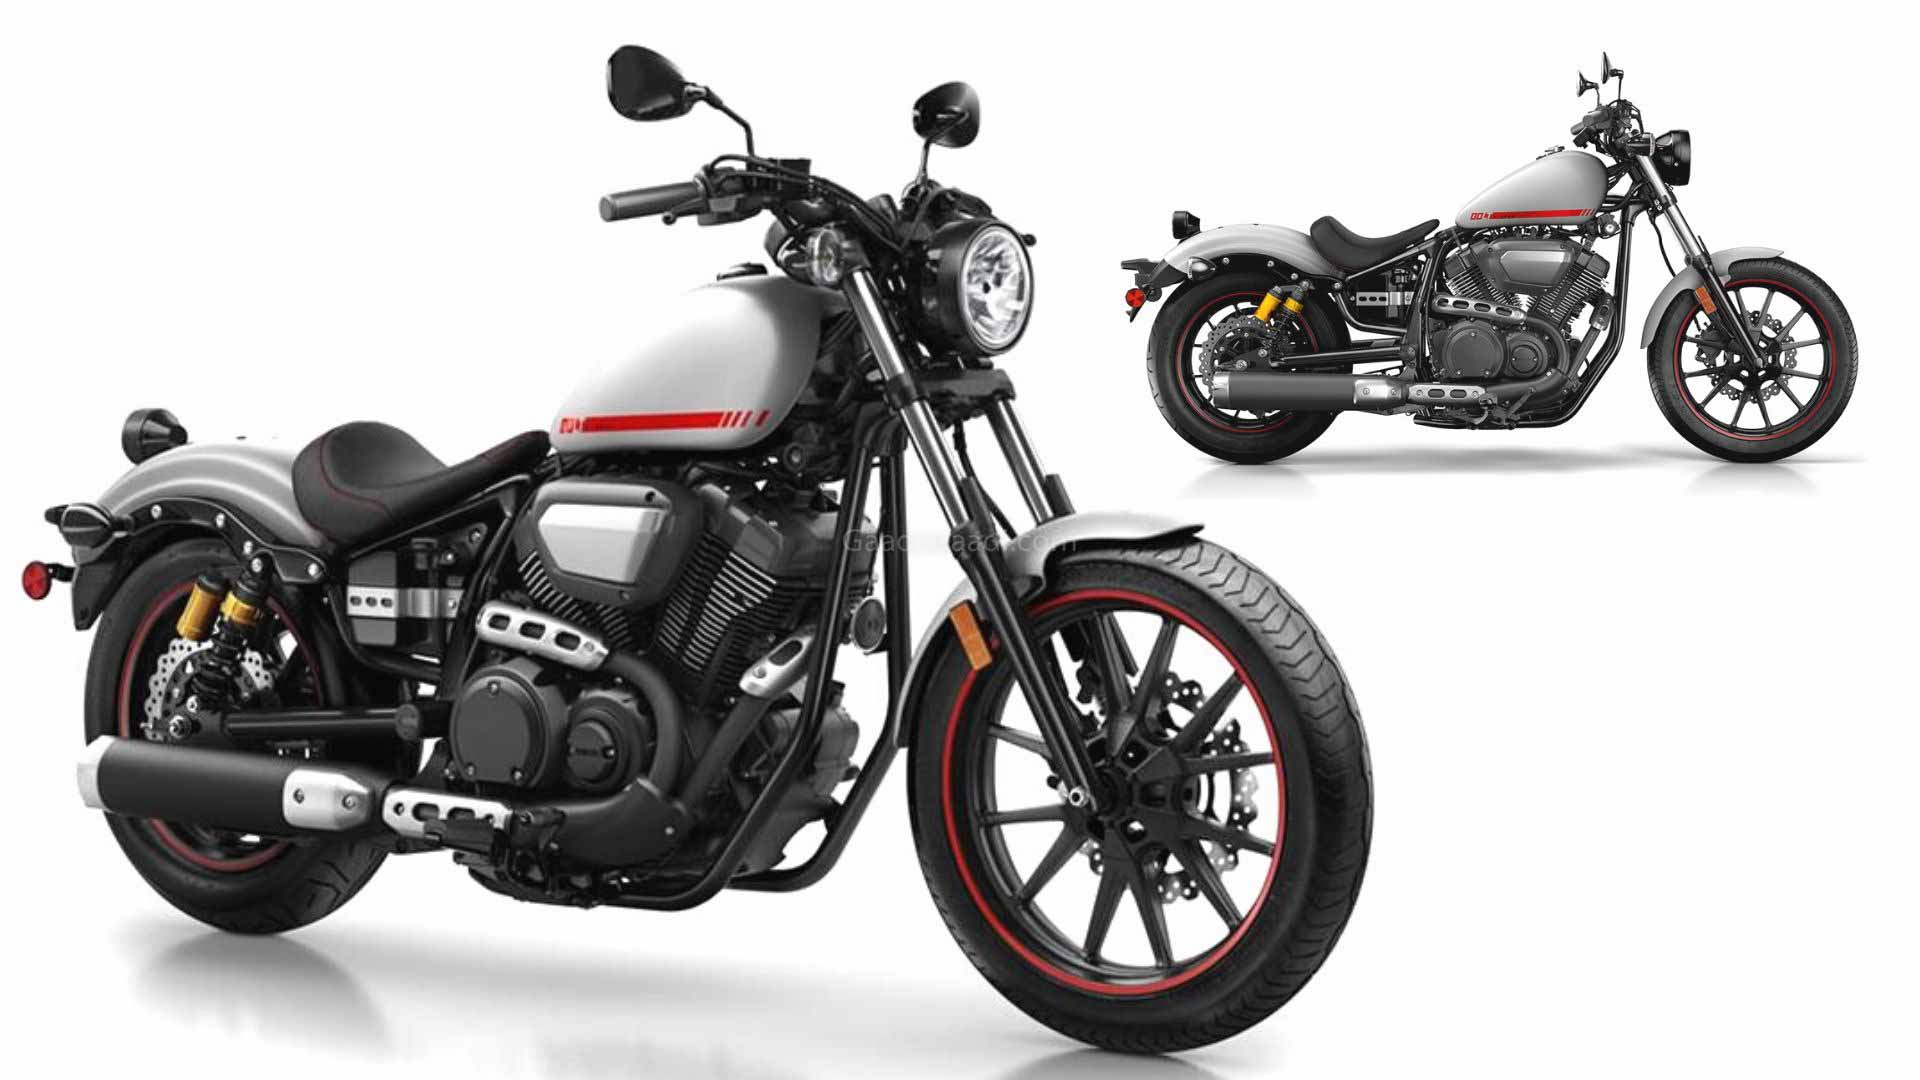 2020 Yamaha Bolt Cruiser Launched, Priced At Rs. 6.9 lakh ...